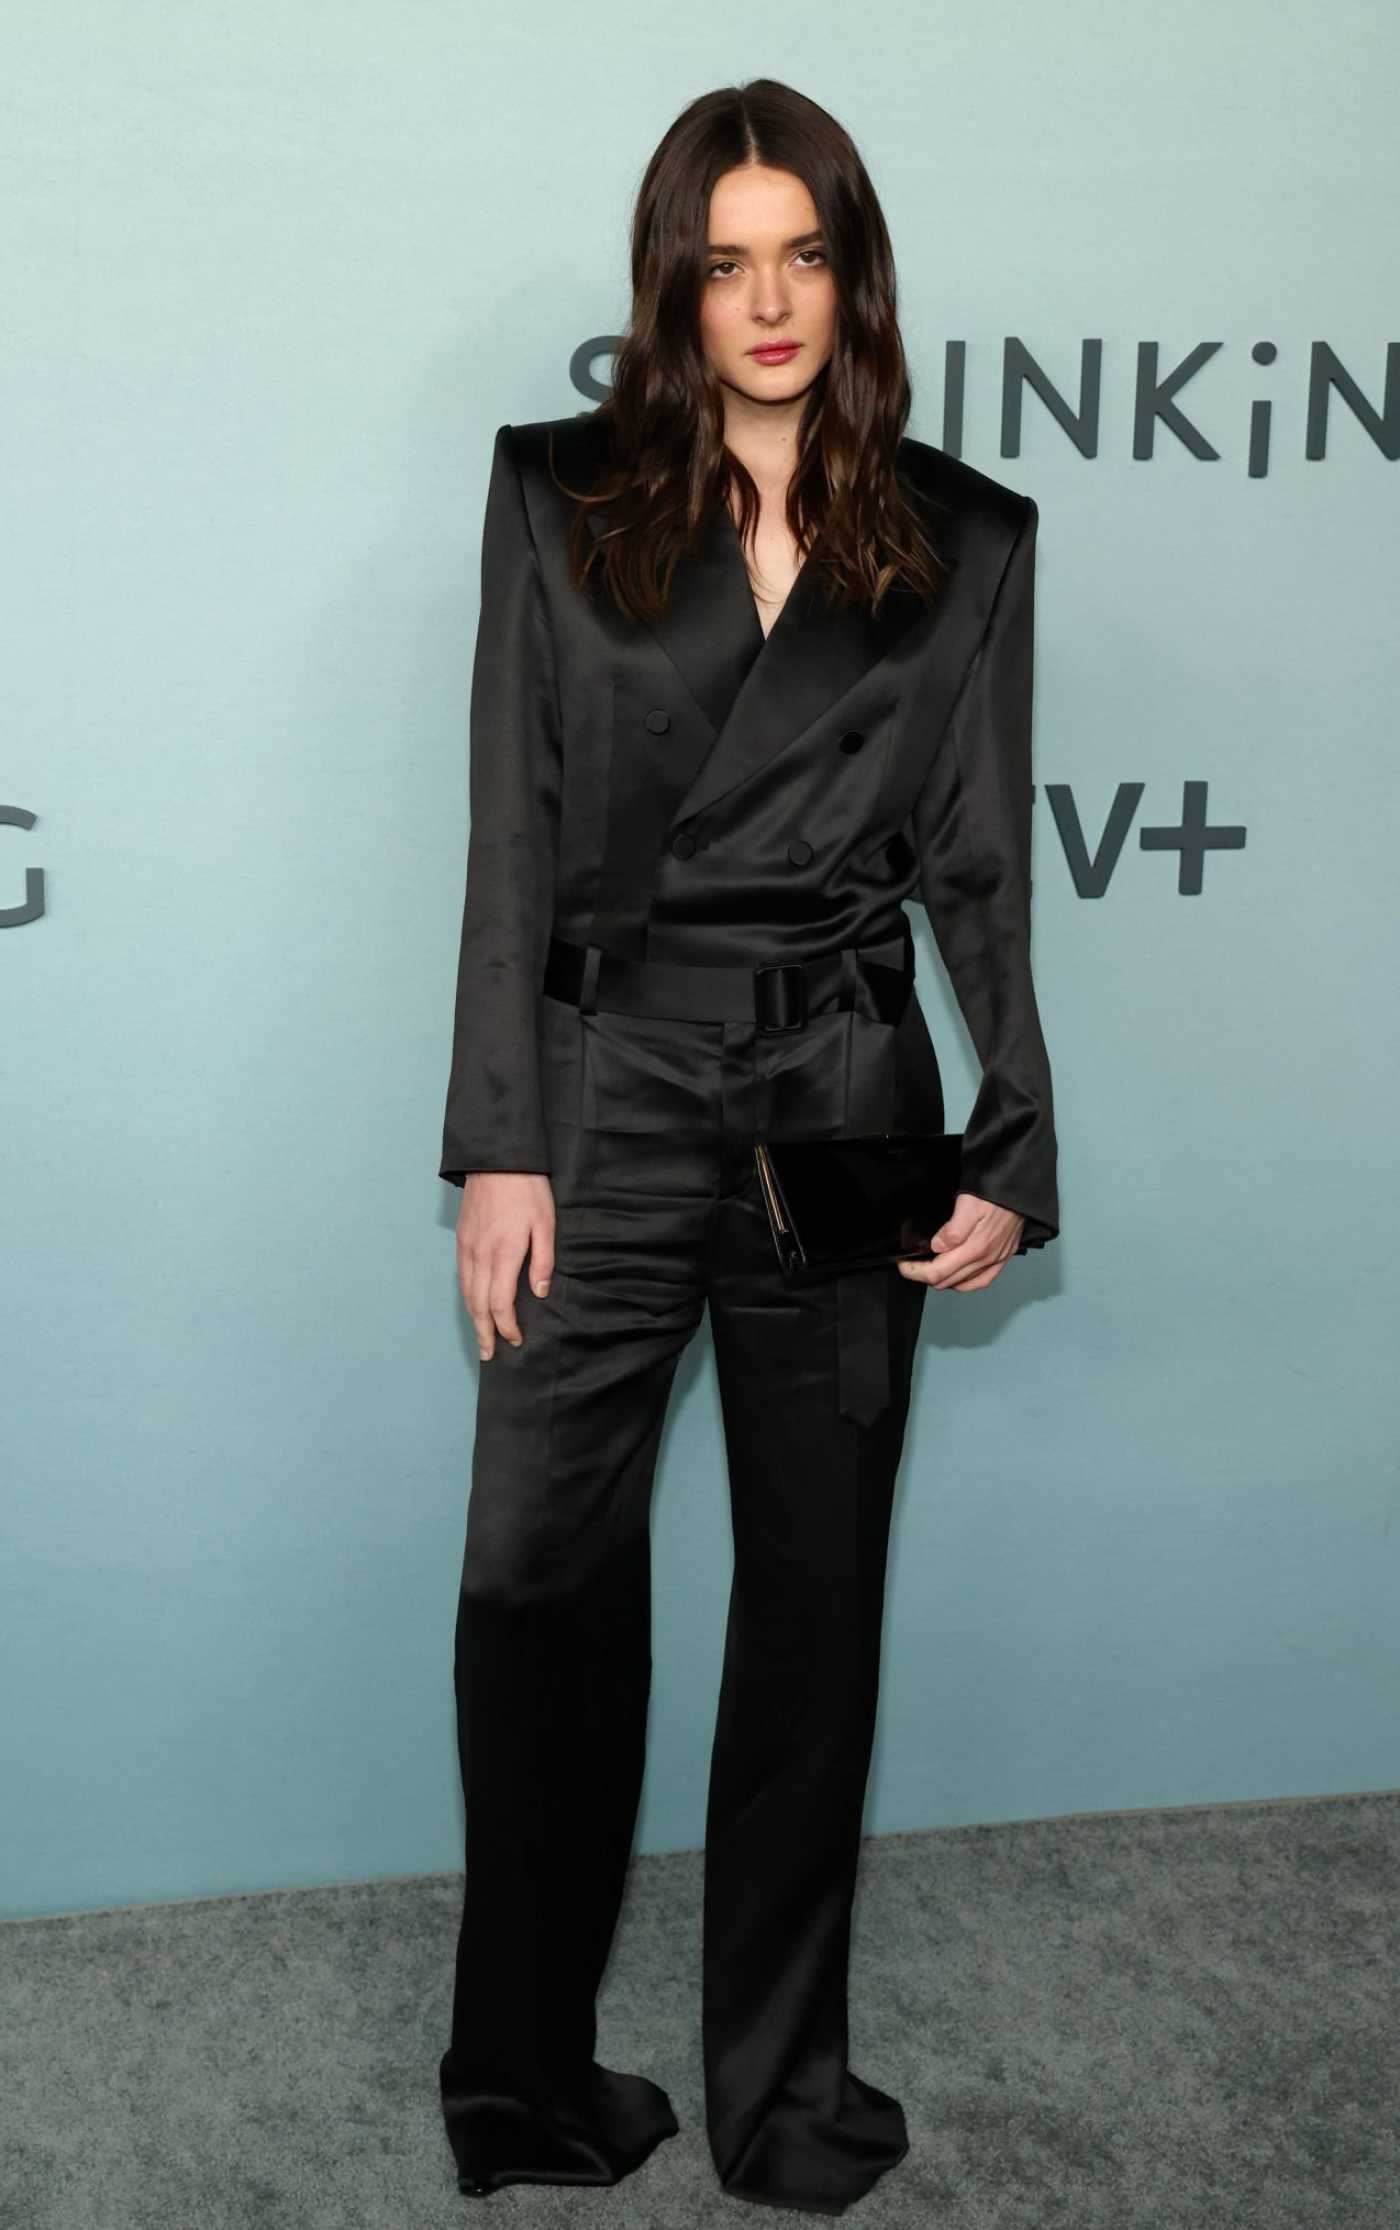 Charlotte Lawrence Attends Shrinking Premiere at Directors Guild of America in Los Angeles 01/26/2023